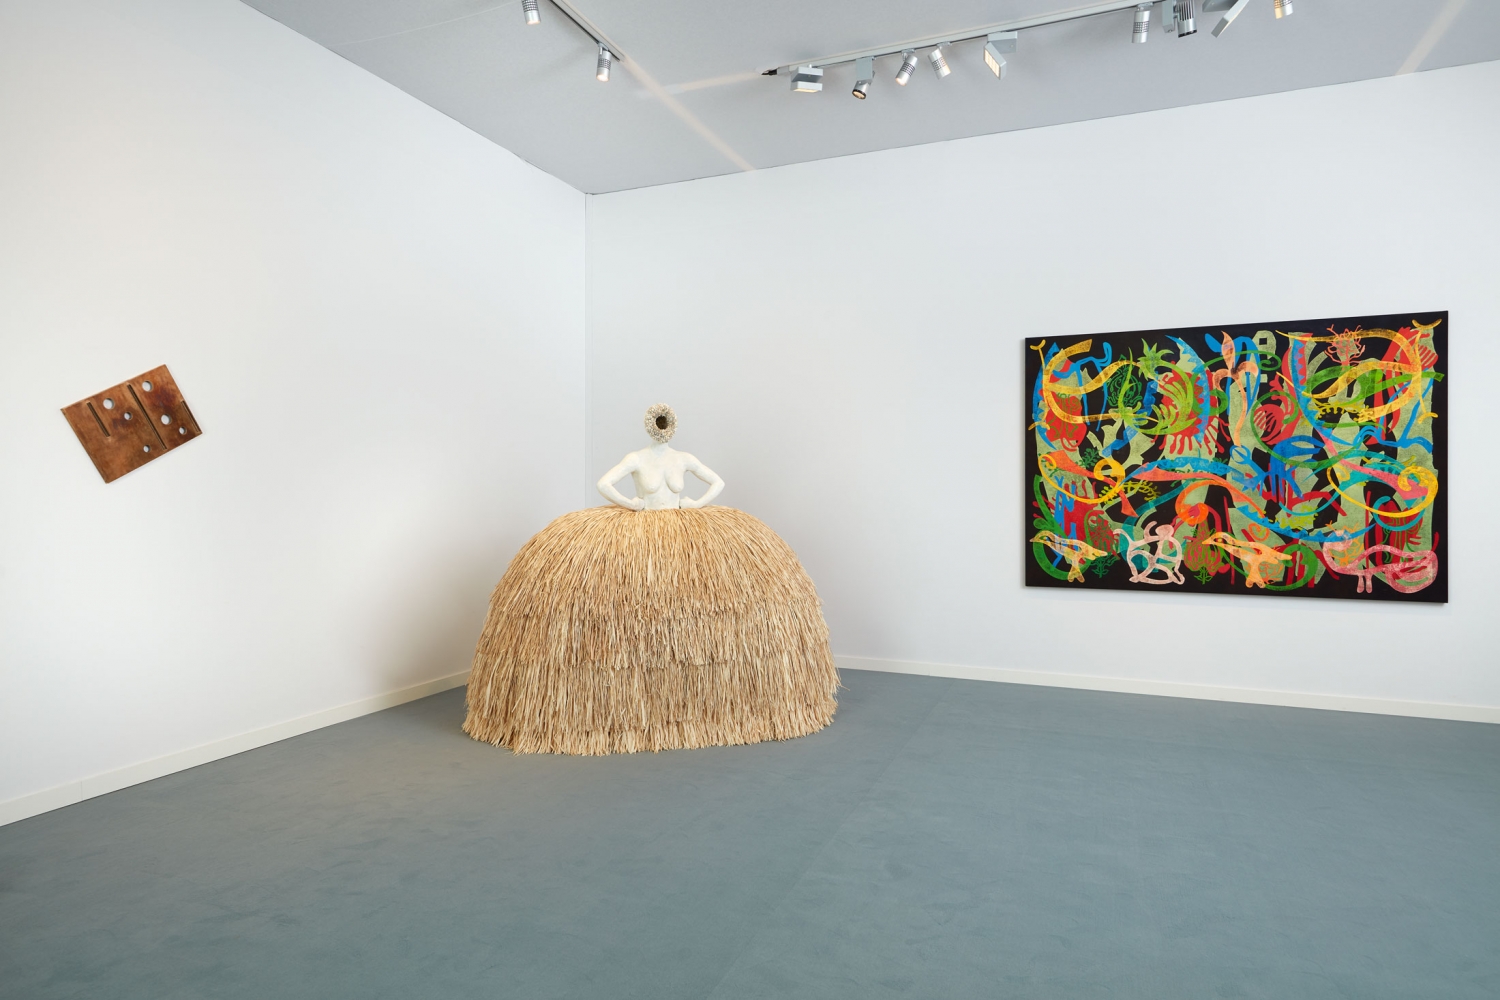 Luhring Augustine

TEFAF New York Spring, Stand 364

Installation view

2019

Pictured from left: Richard Rezac, Simone Leigh, Philip Taaffe